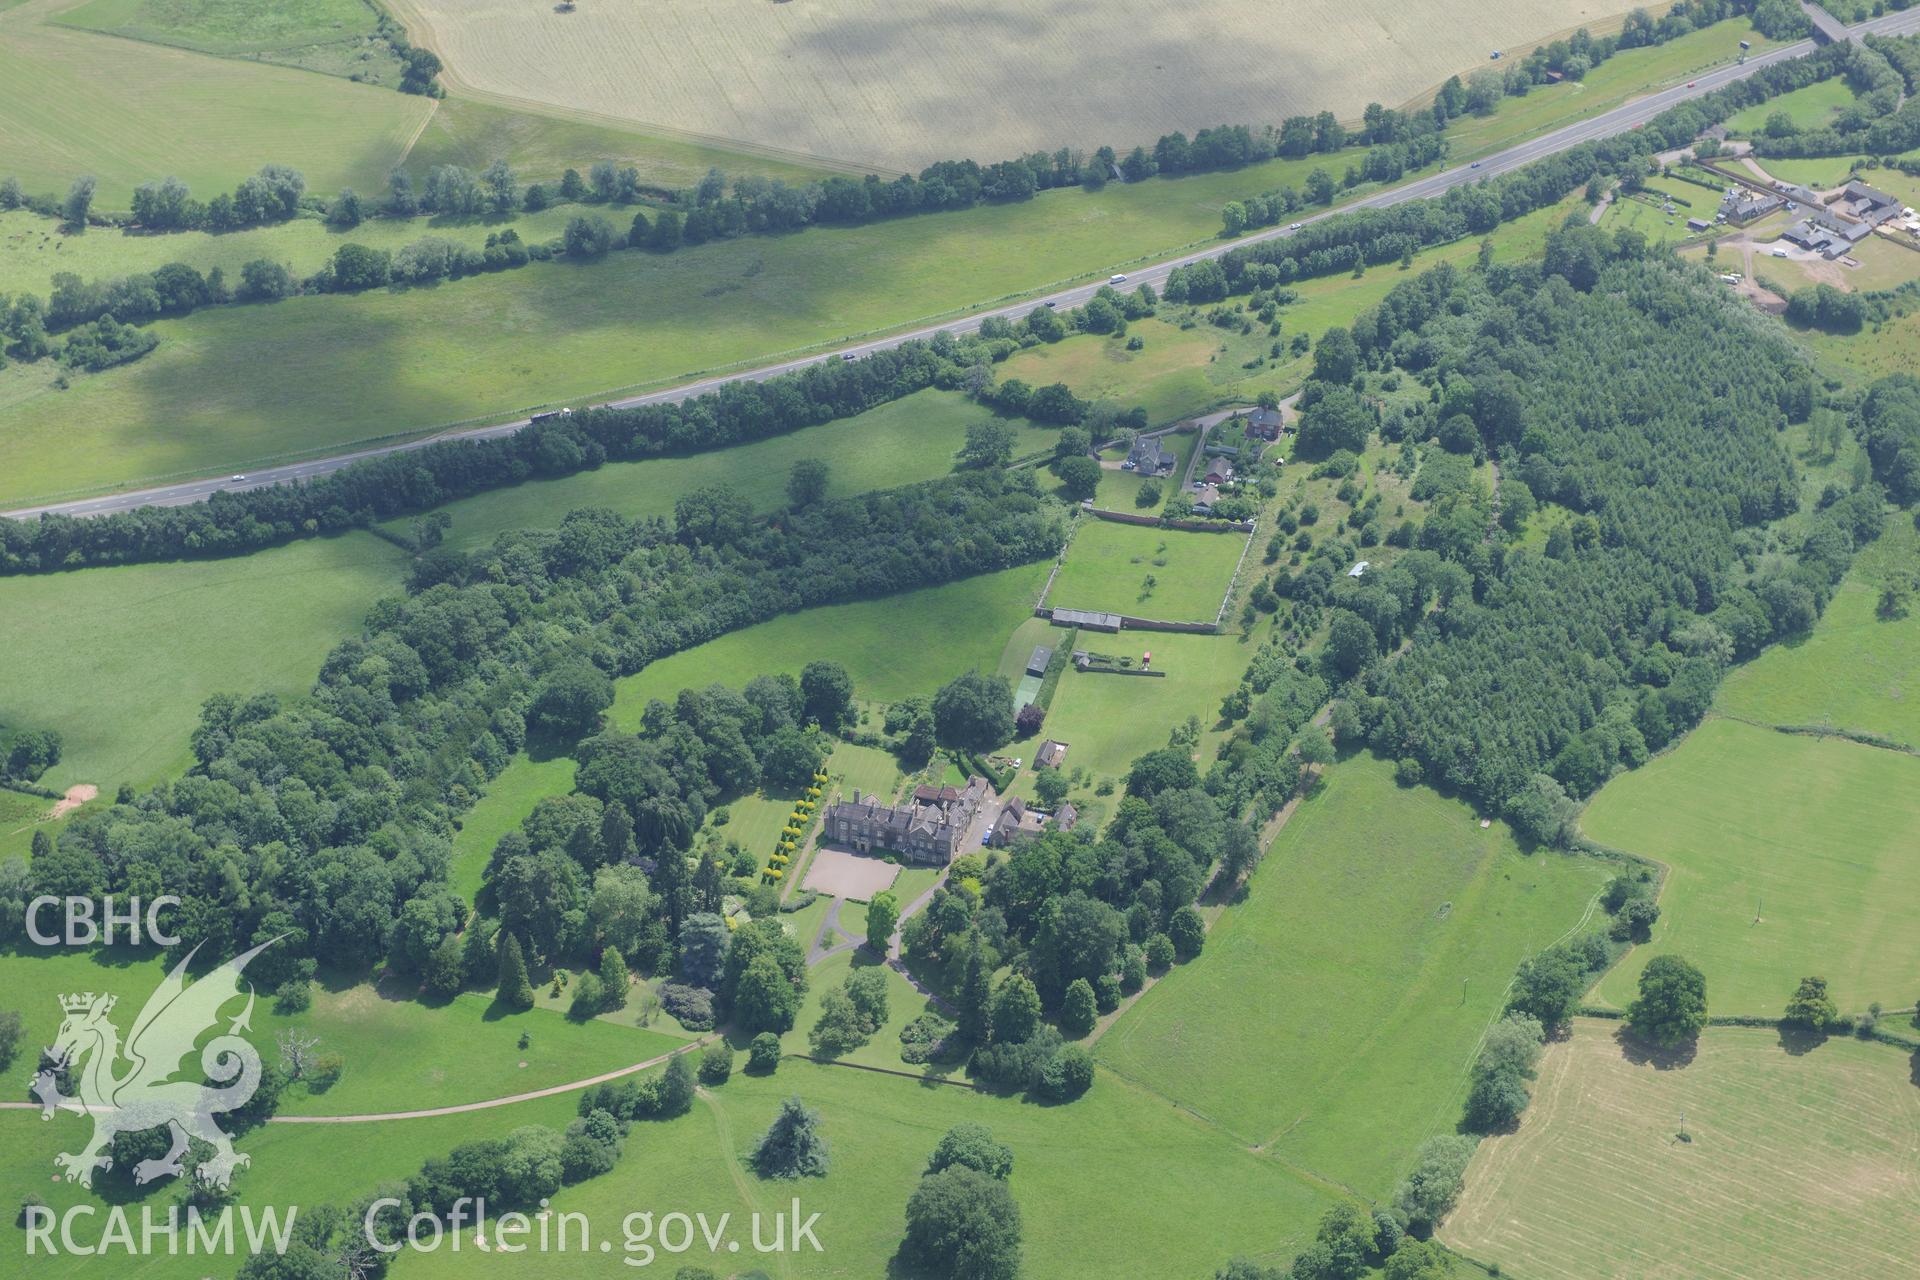 Cefn Tilla Court and Garden, Llandenny, near Usk. Oblique aerial photograph taken during the Royal Commission's programme of archaeological aerial reconnaissance by Toby Driver on 29th June 2015.